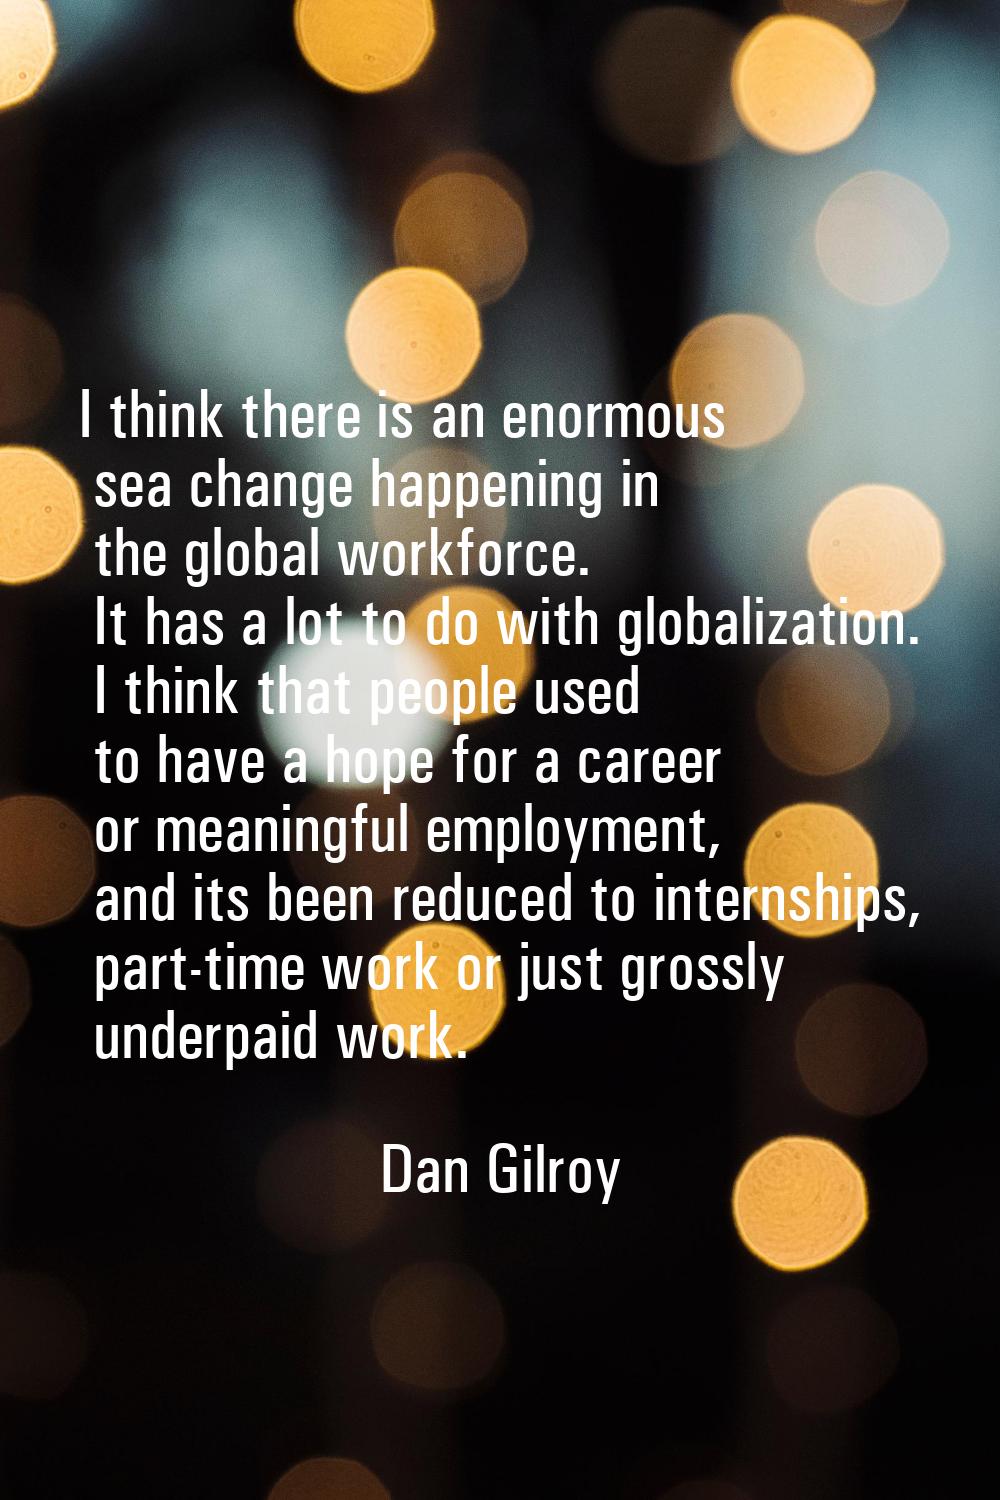 I think there is an enormous sea change happening in the global workforce. It has a lot to do with 